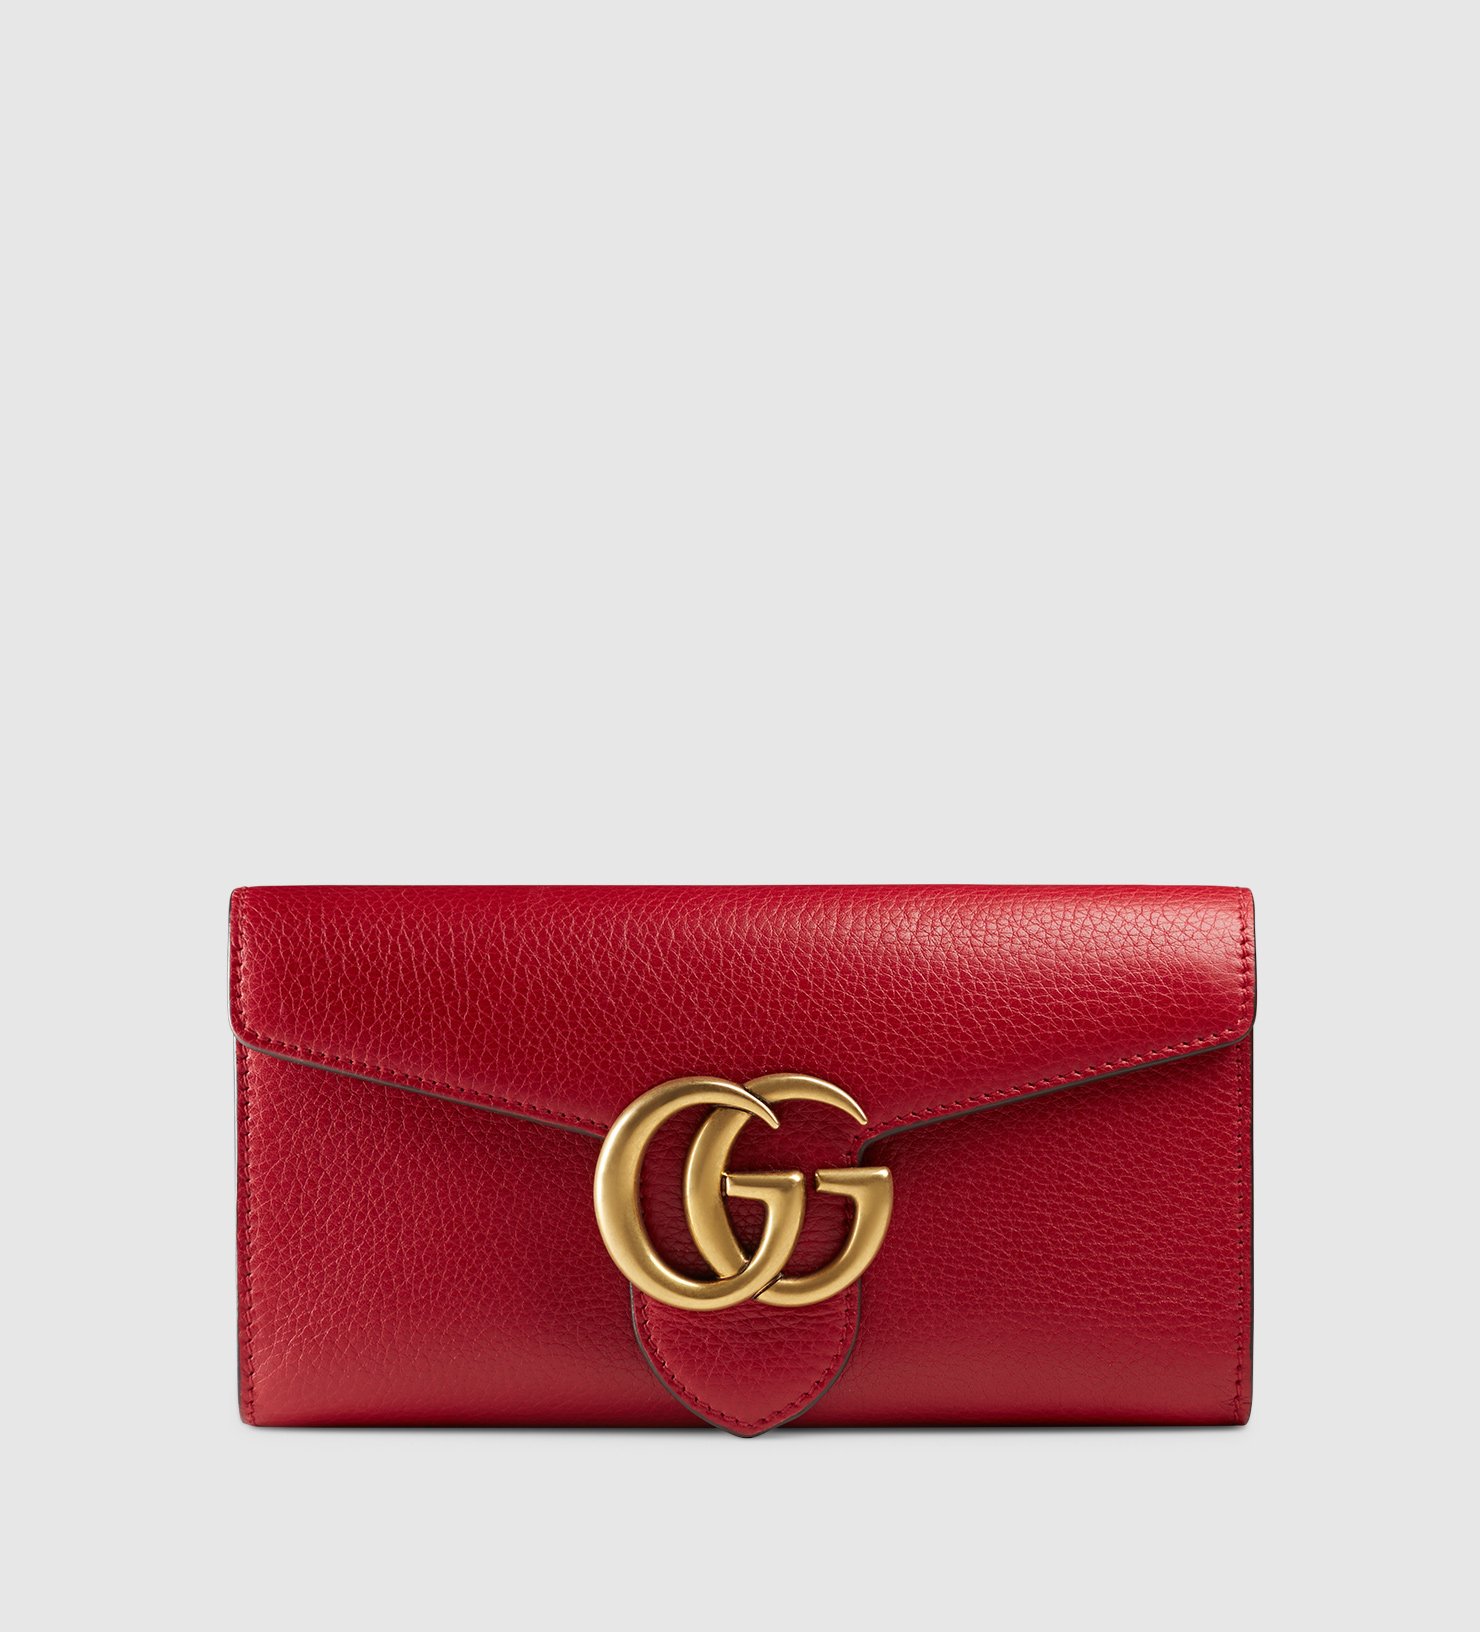 Lyst - Gucci Gg Marmont Continental Wallet in Red